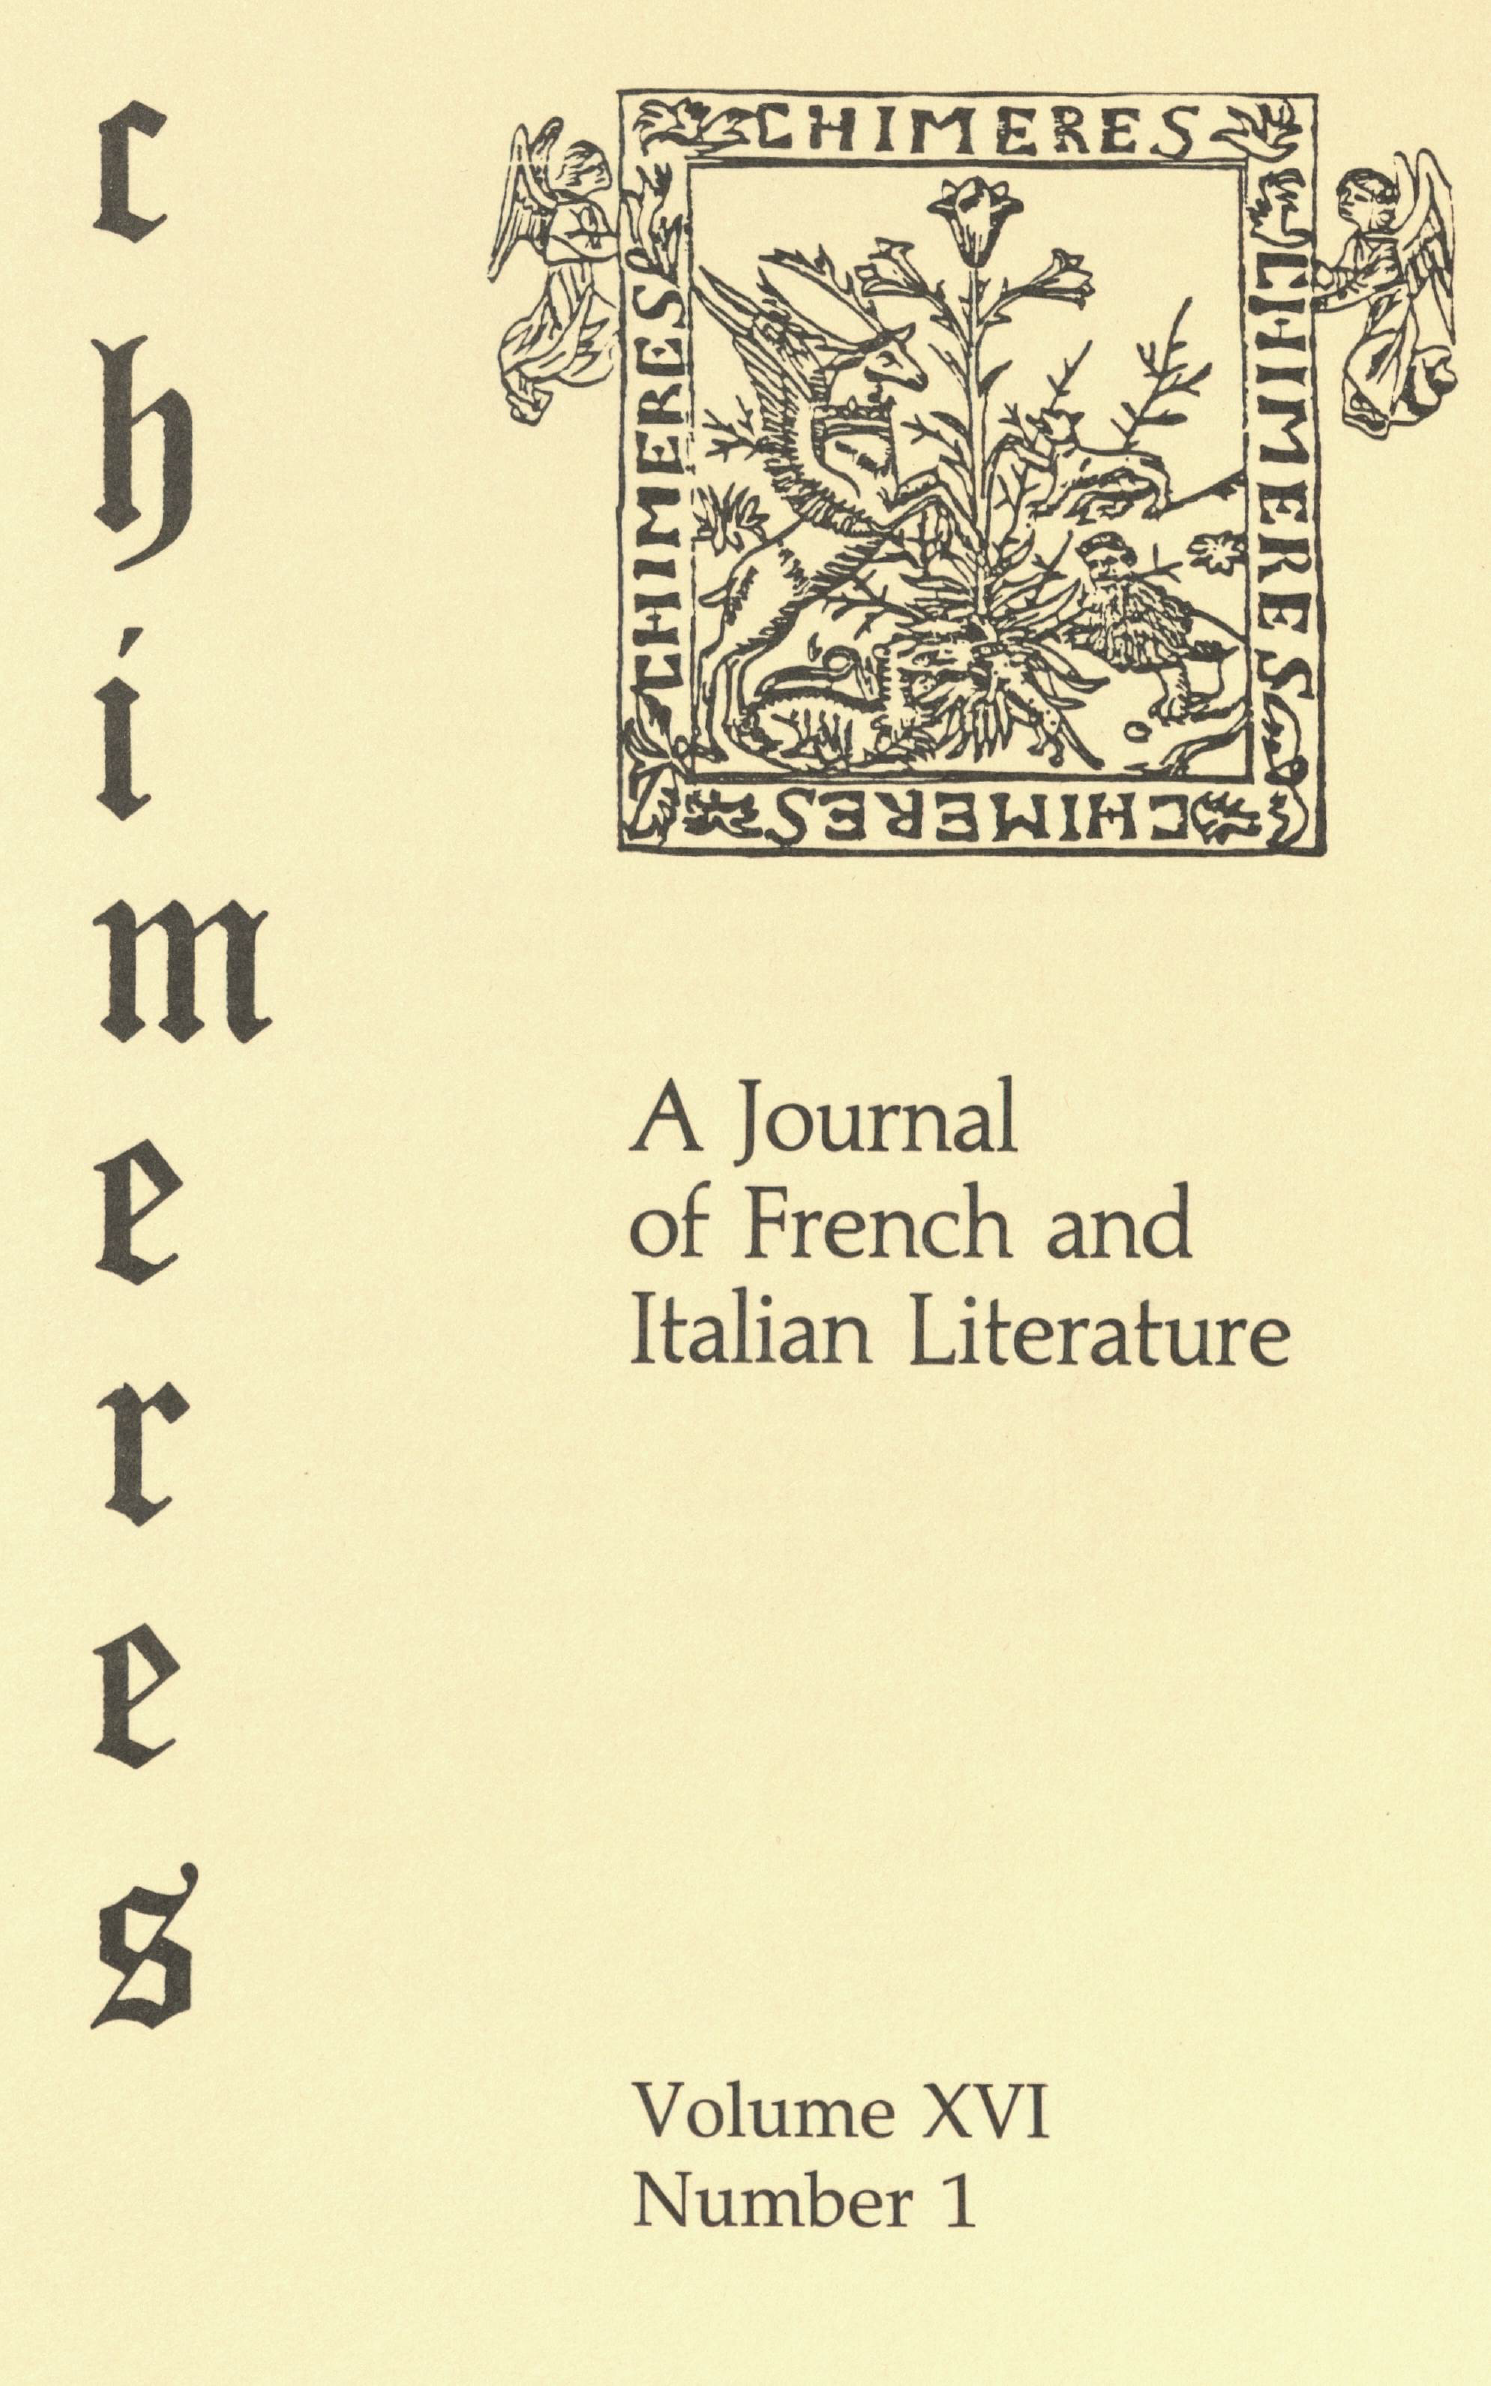 Cover for Chimères, Vol. 16.2, Spring 1983